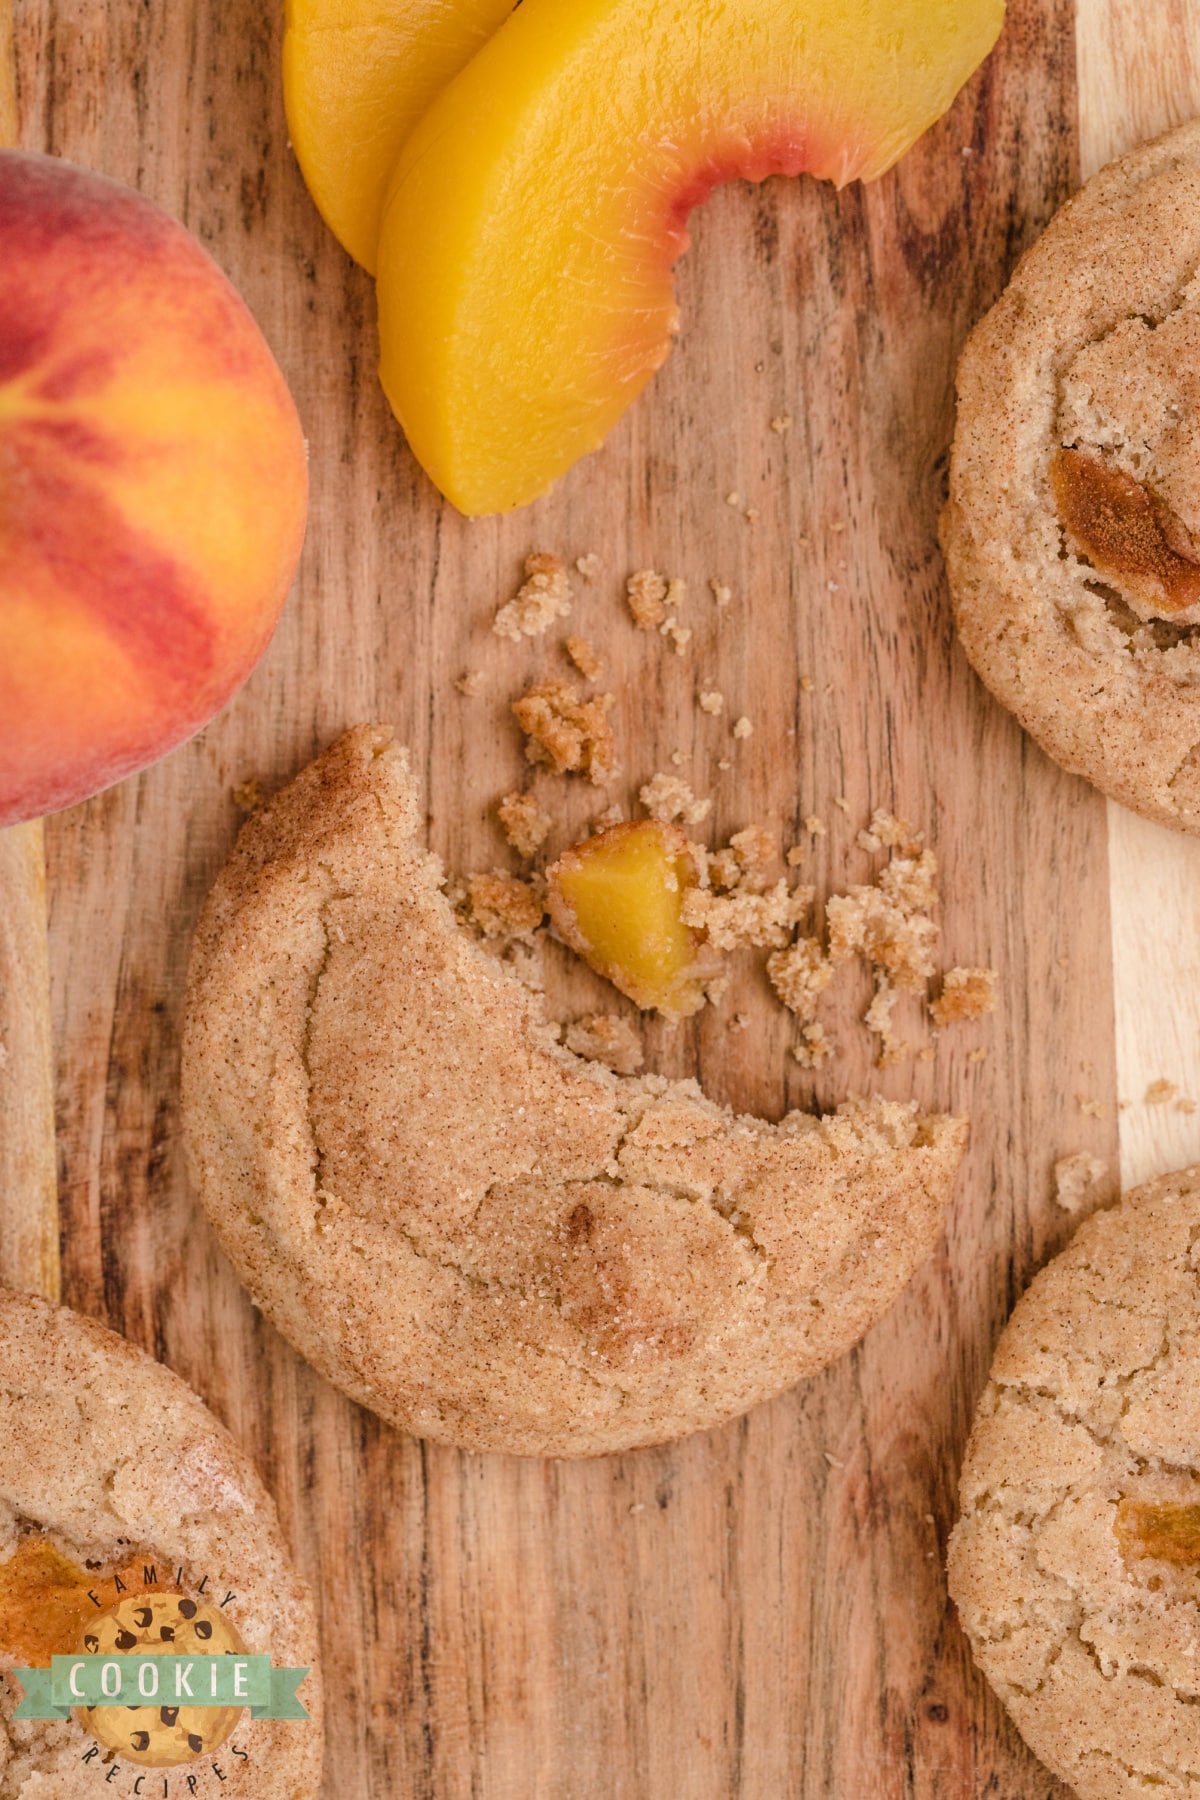 Snickerdoodle cookies made with fresh peaches